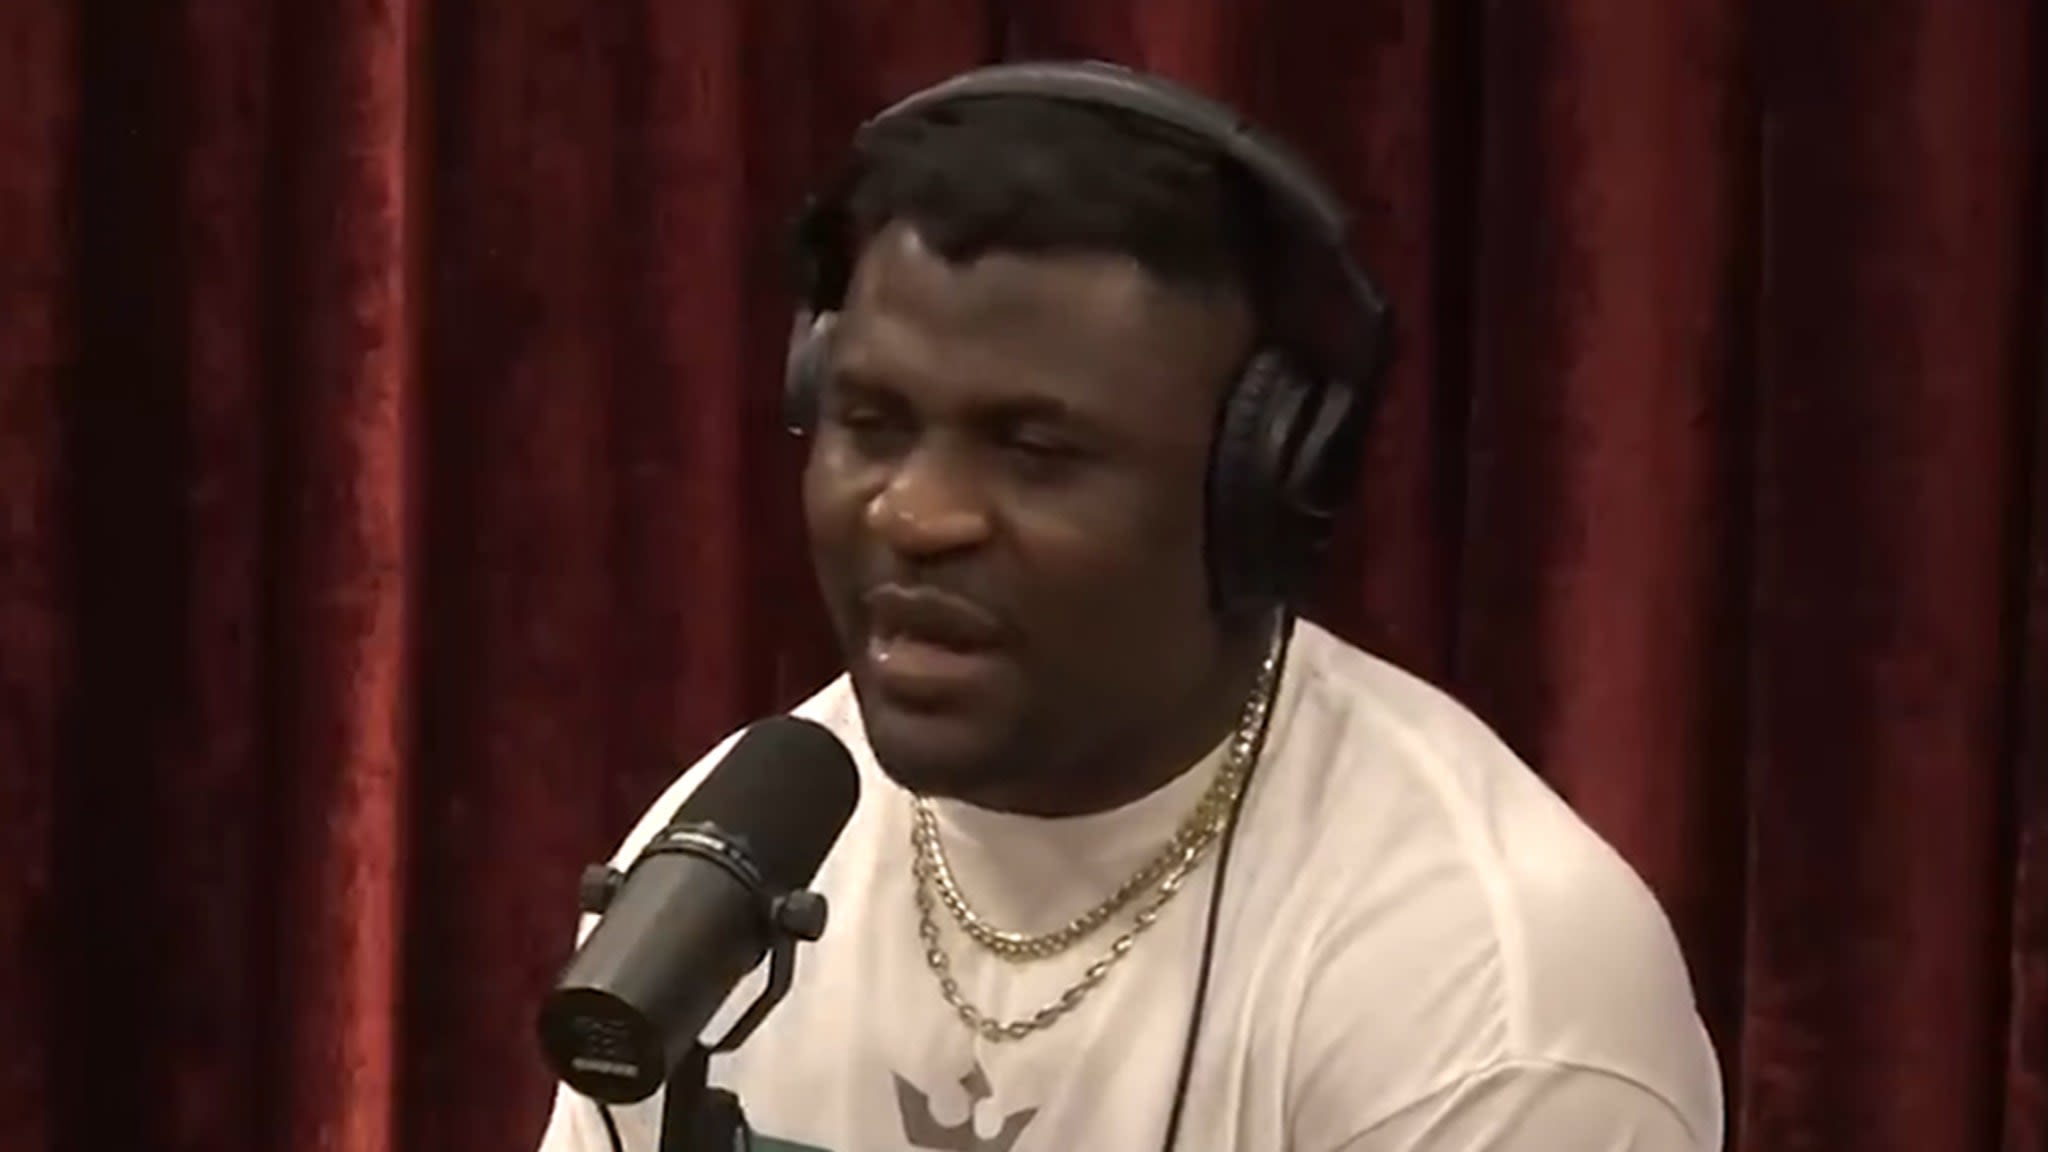 Francis Ngannou Opens Up On 15-Month Old Son's Death, 'What Do You Mean He's Gone?'